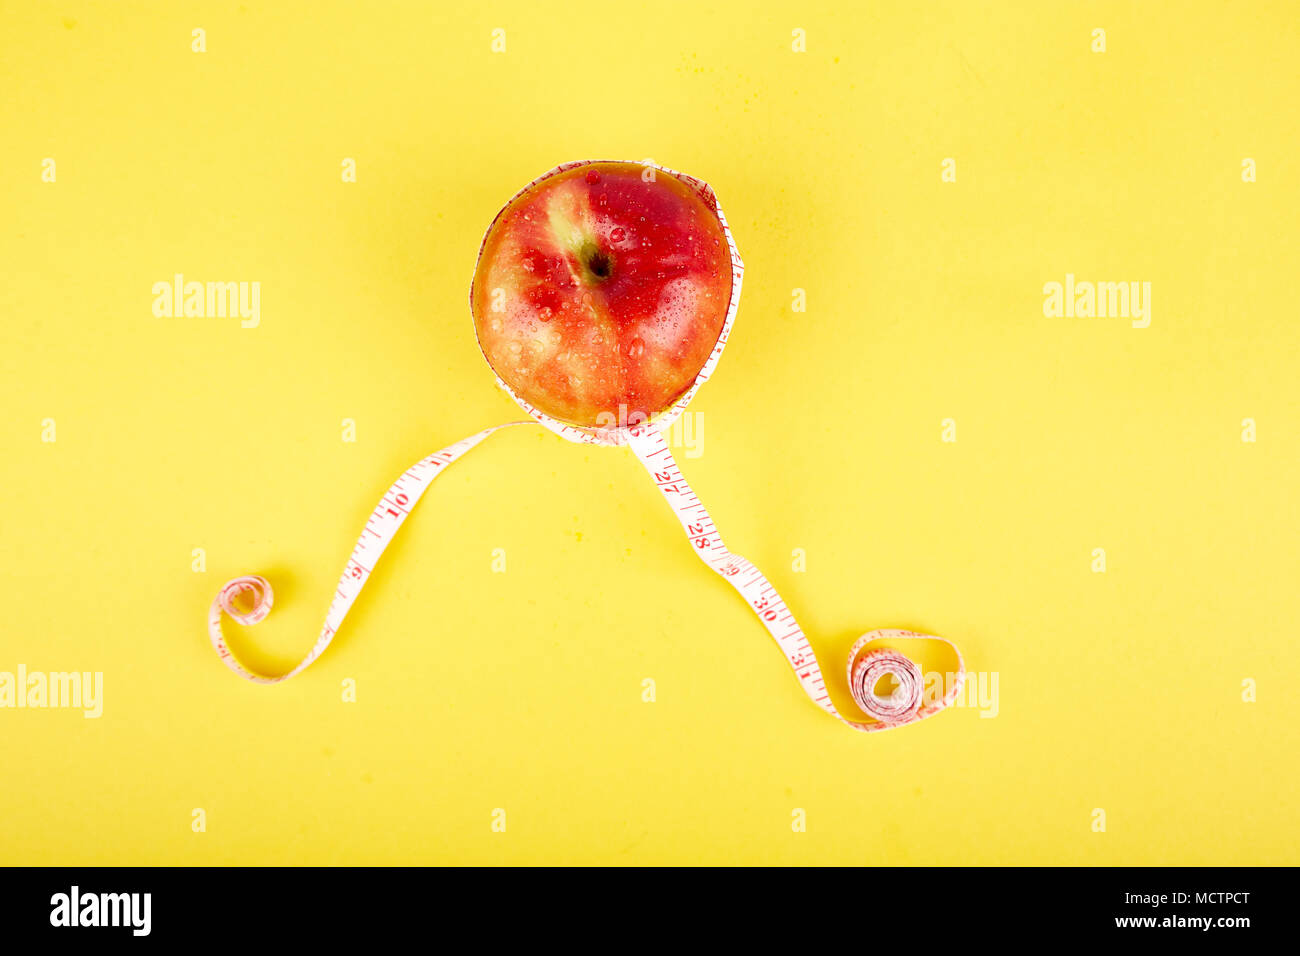 Measuring tape wrapped around a red apple as a symbol of diet on yellow paper background. Weight loss concept. Diet. Dieting concept. Vegan. Clear foo Stock Photo